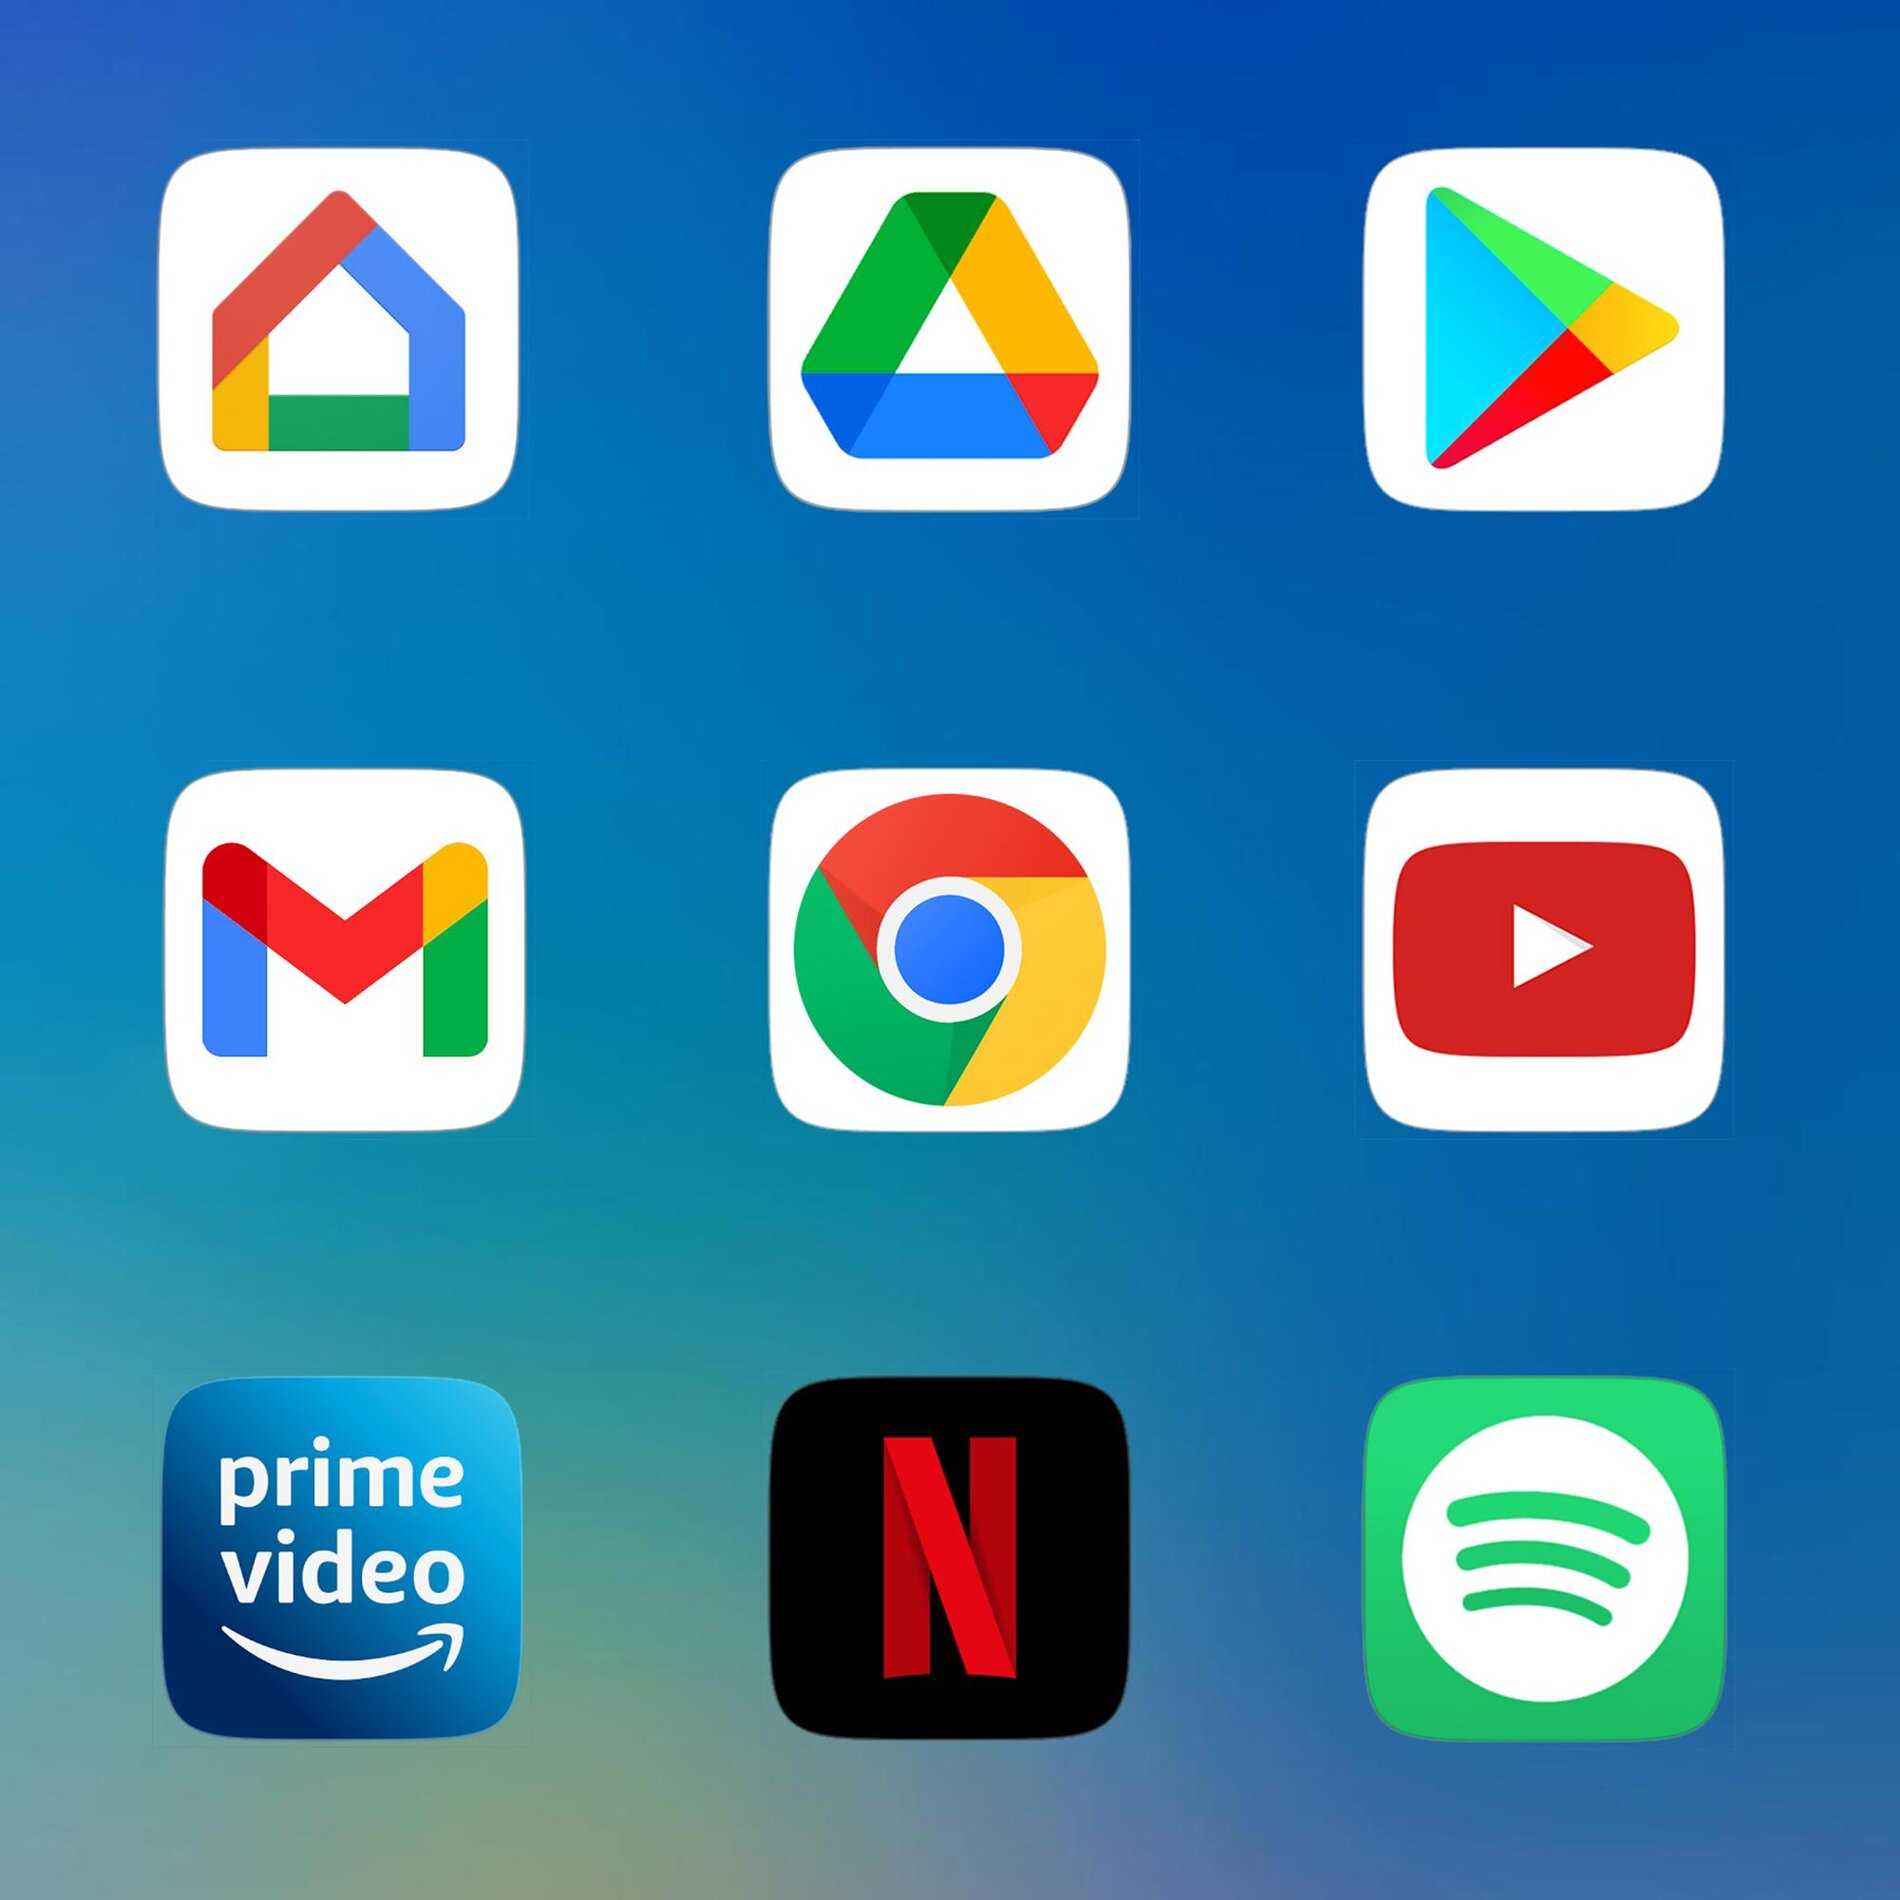 Emui – Icon Pack v5.5 (Patched) APK